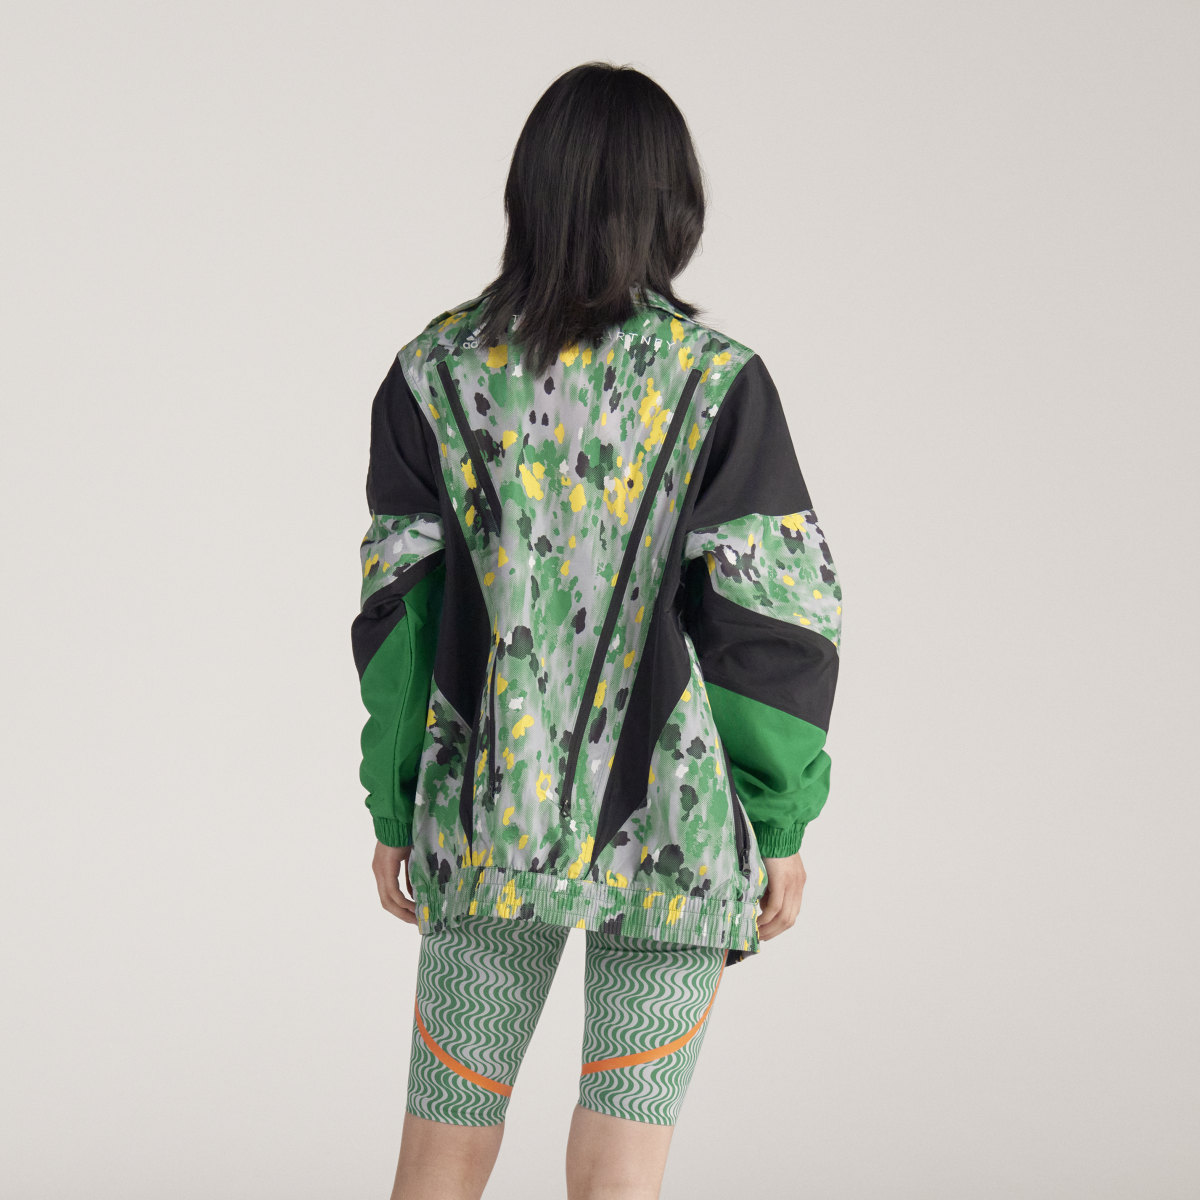 Adidas by Stella McCartney Printed Woven Track Top. 5